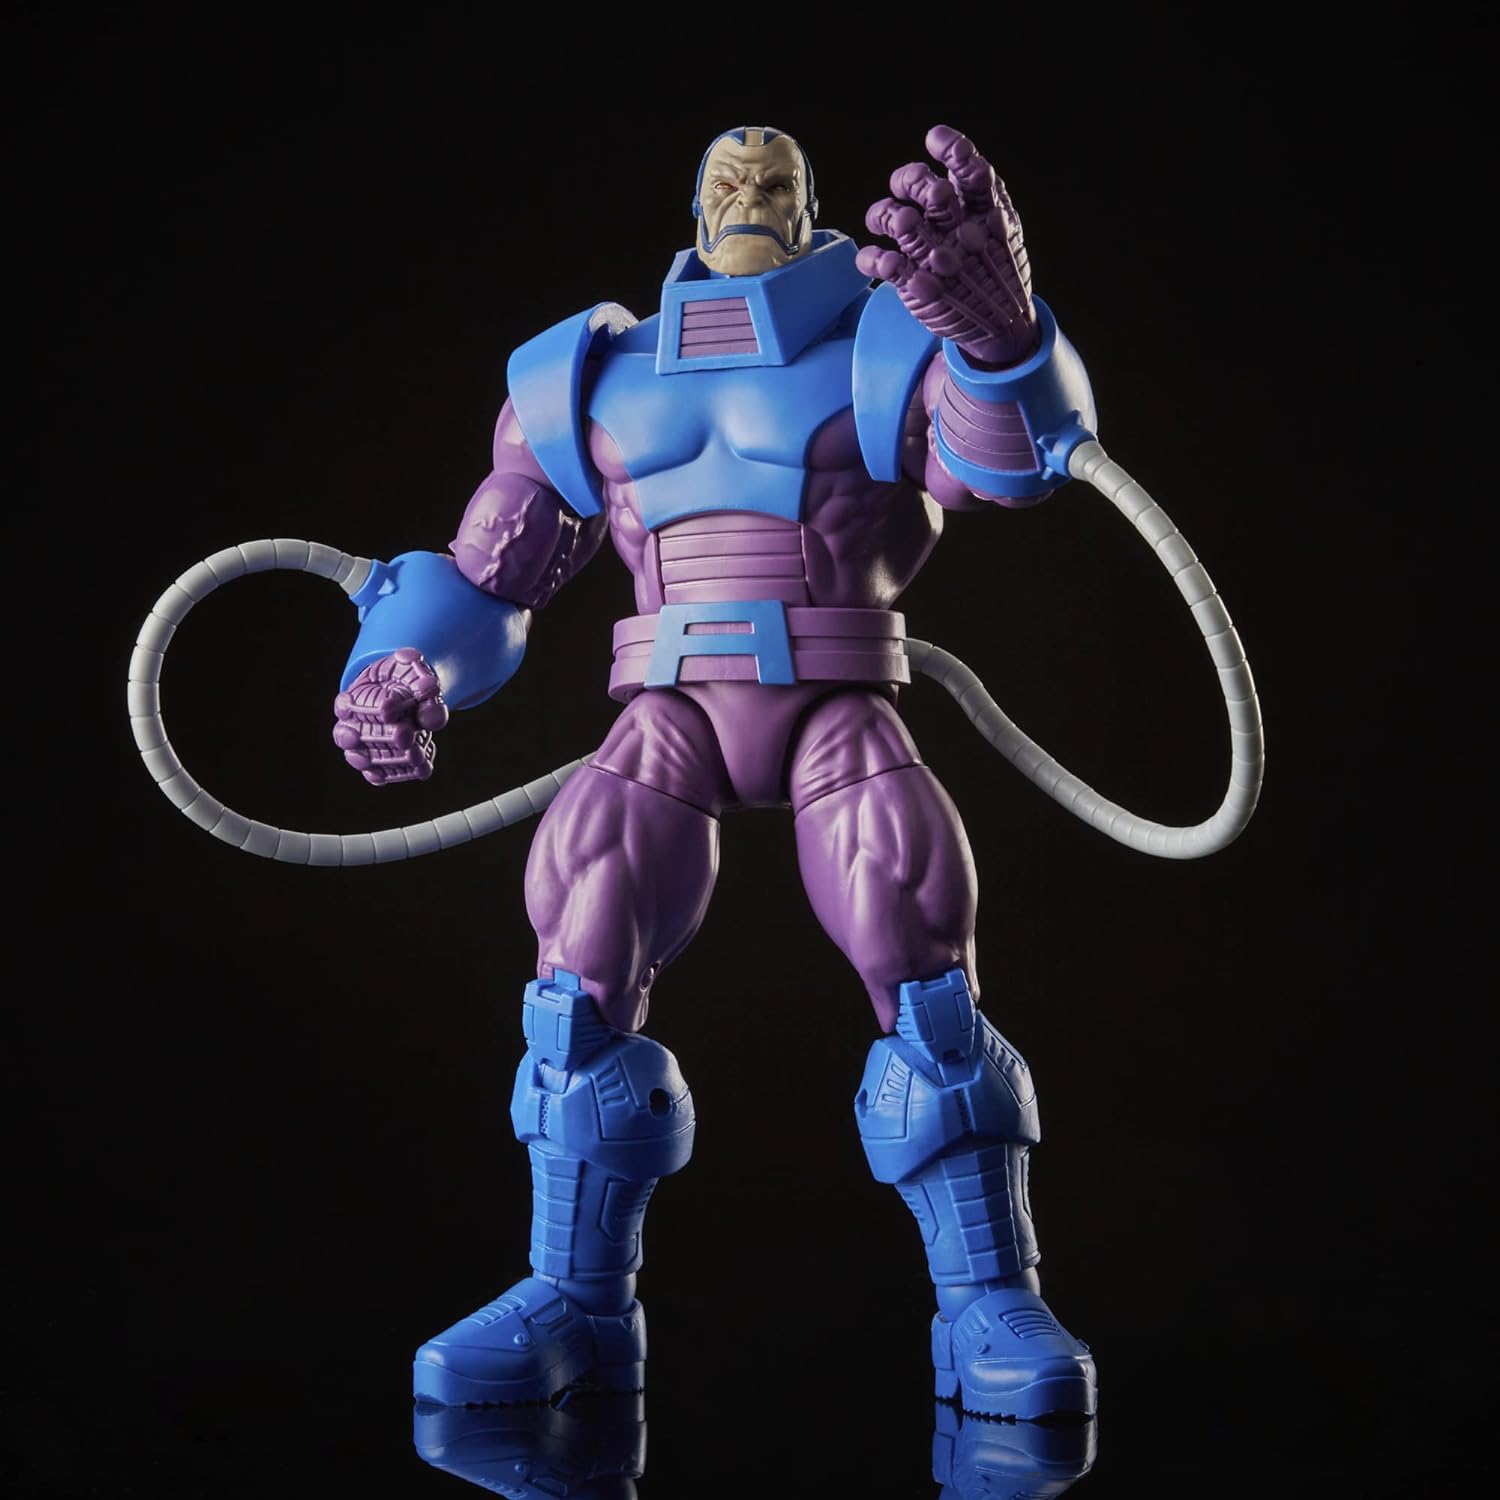 Hasbro Marvel Legends Series The Uncanny X-Men 6-inch Apocalypse Retro Action Figure Toy, Includes 8 Accessories, Kids Ages 4 and Up…